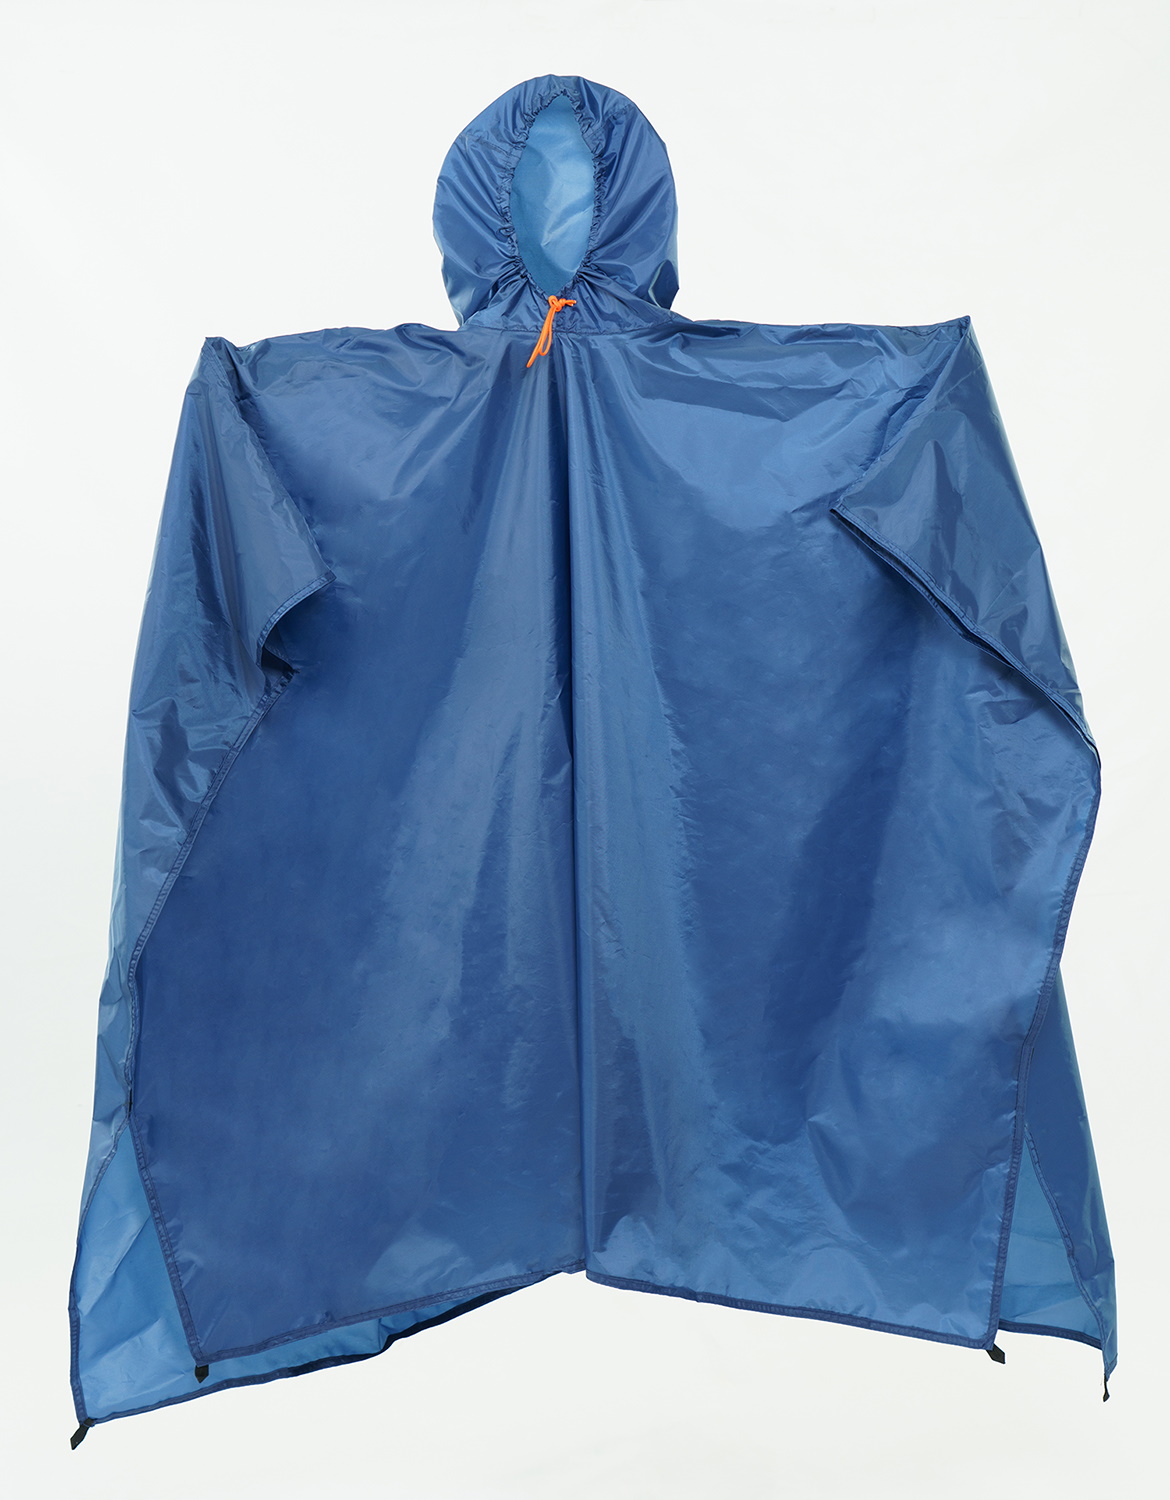 Poncho Rain Fly Tarp | River Country Products